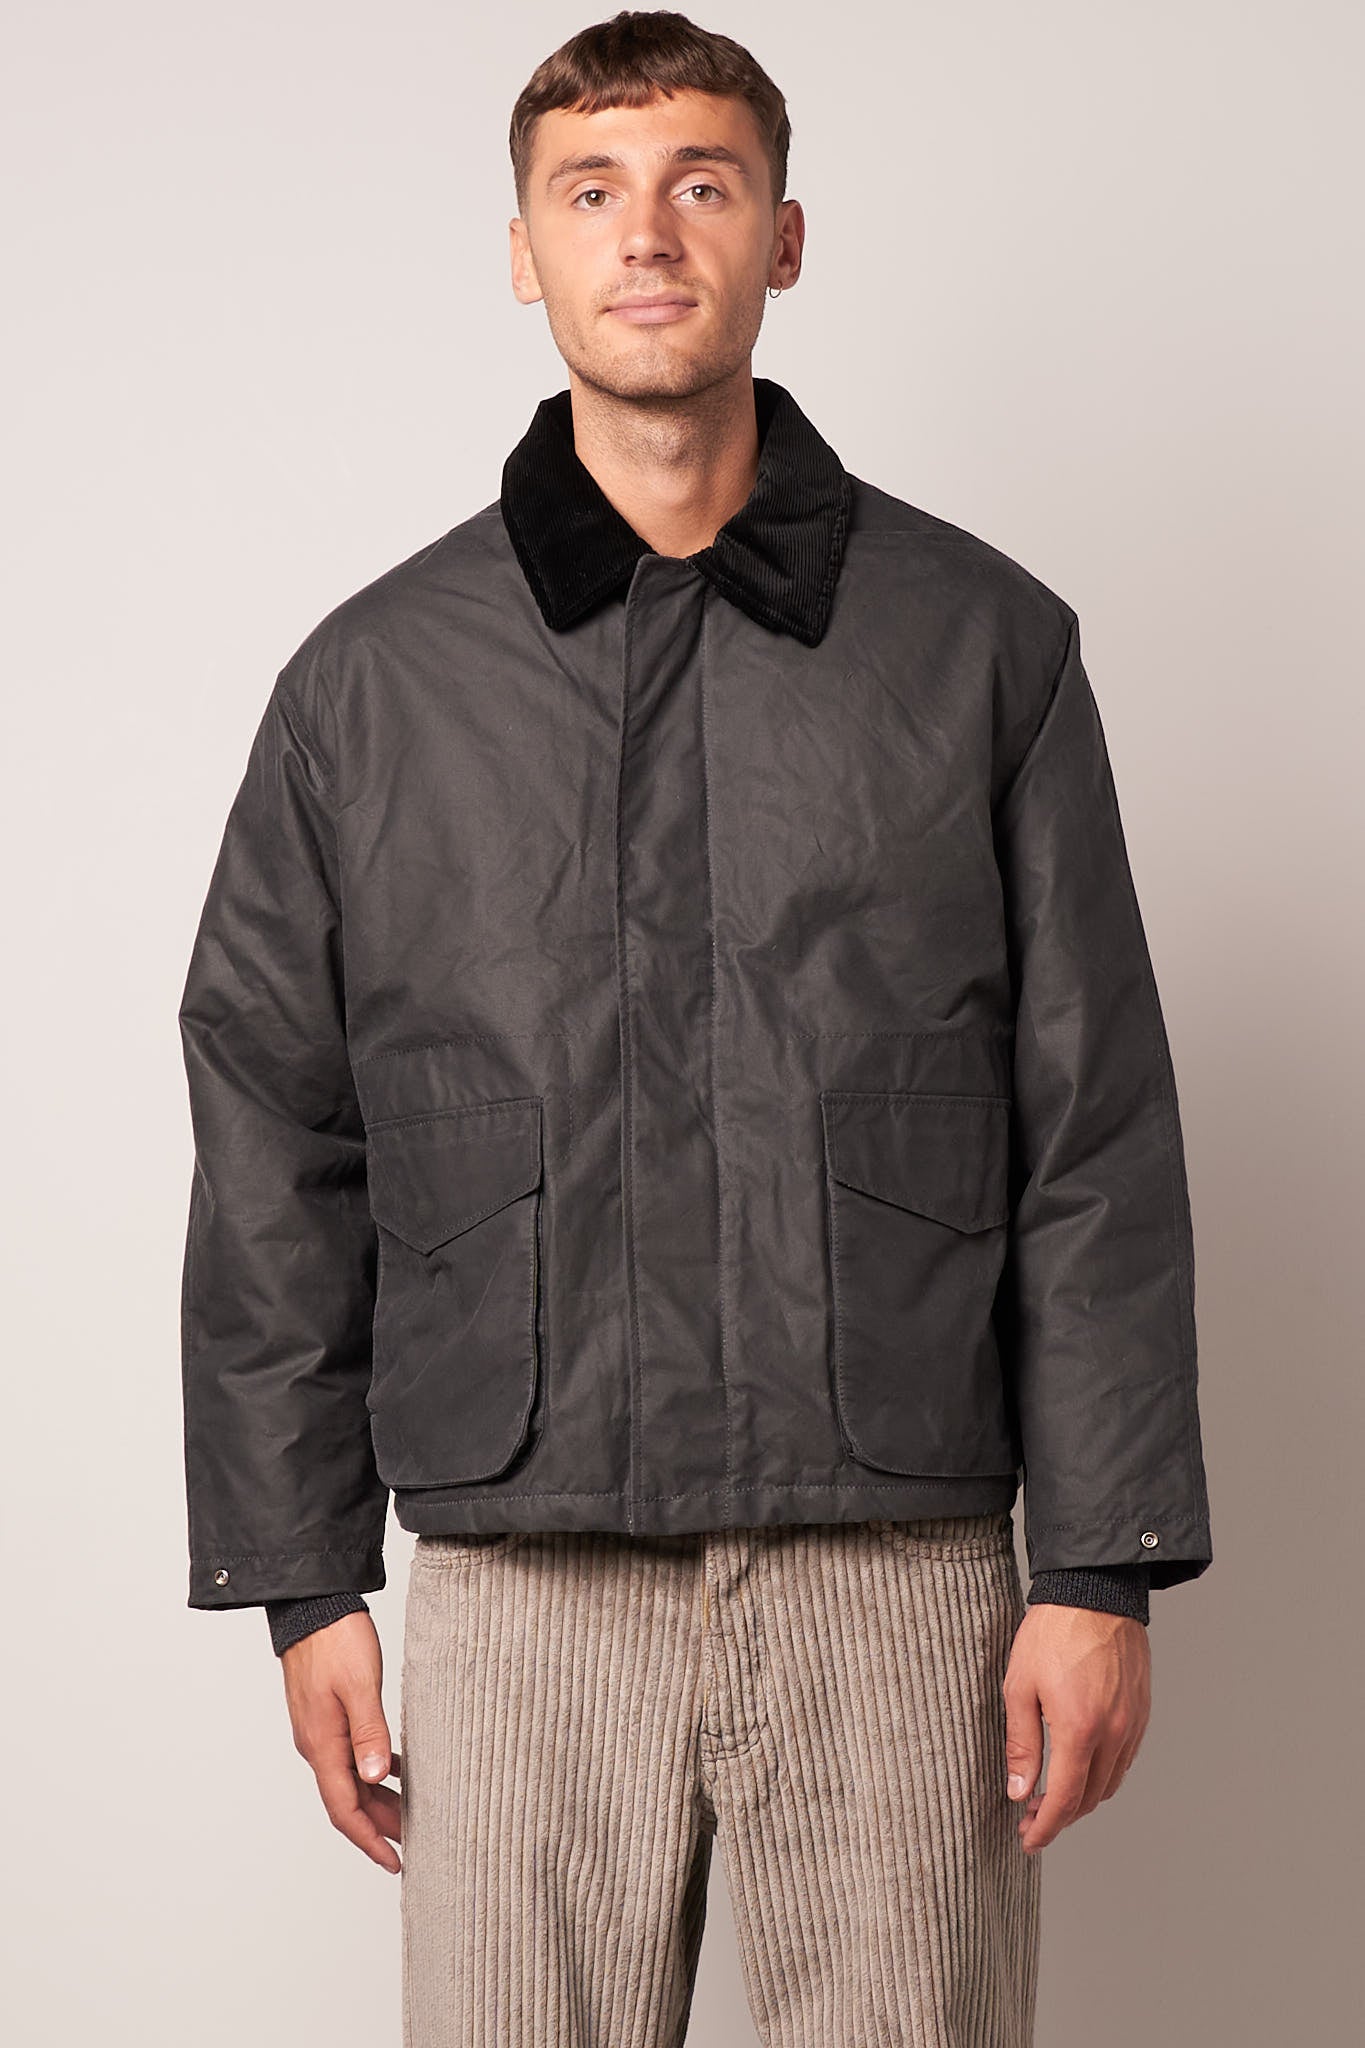 Jackets & Coats - Buy Outerwear at STRØM